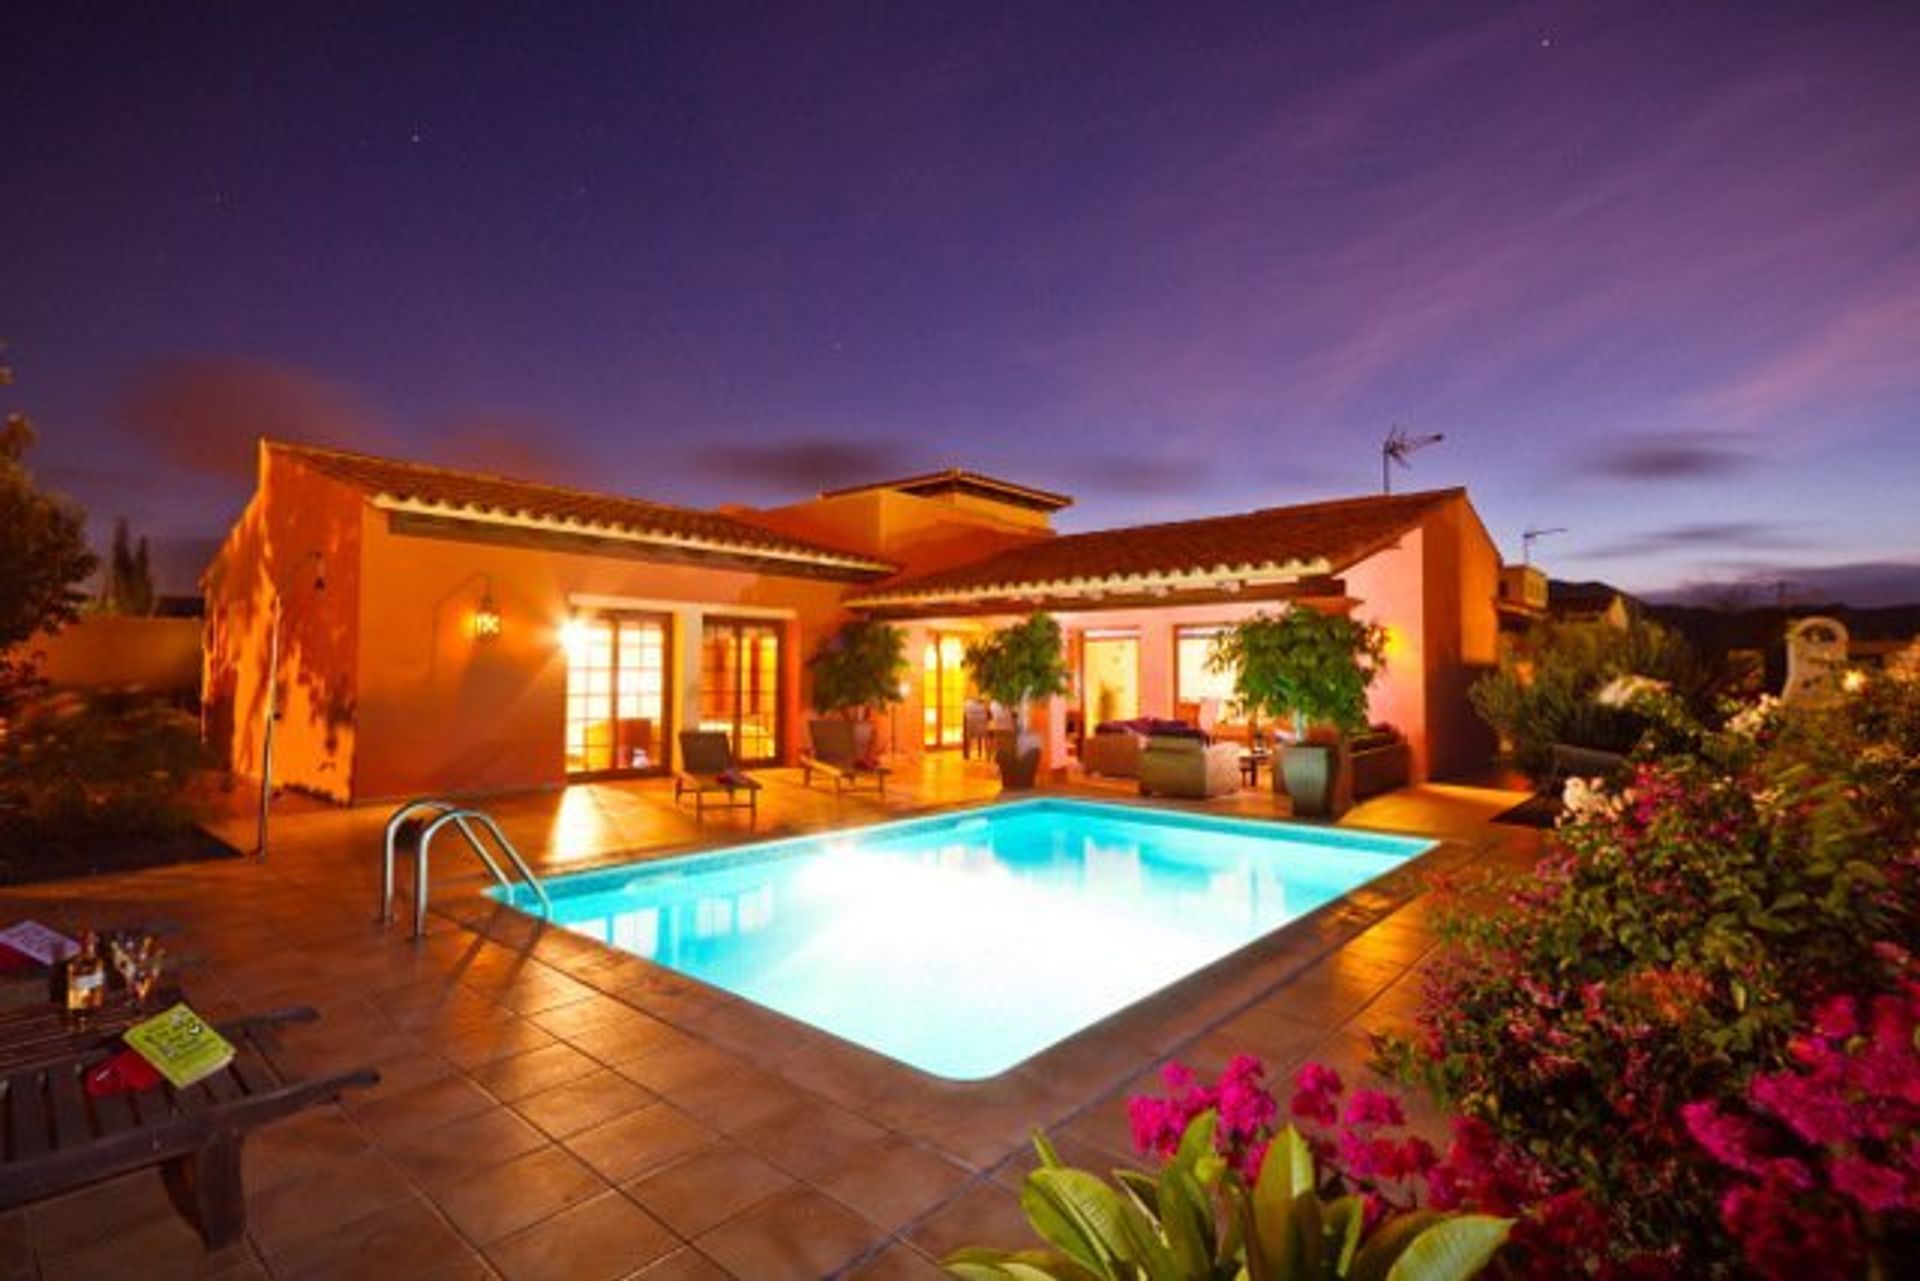 We have a number of luxury villas in Fuerteventura with private pools